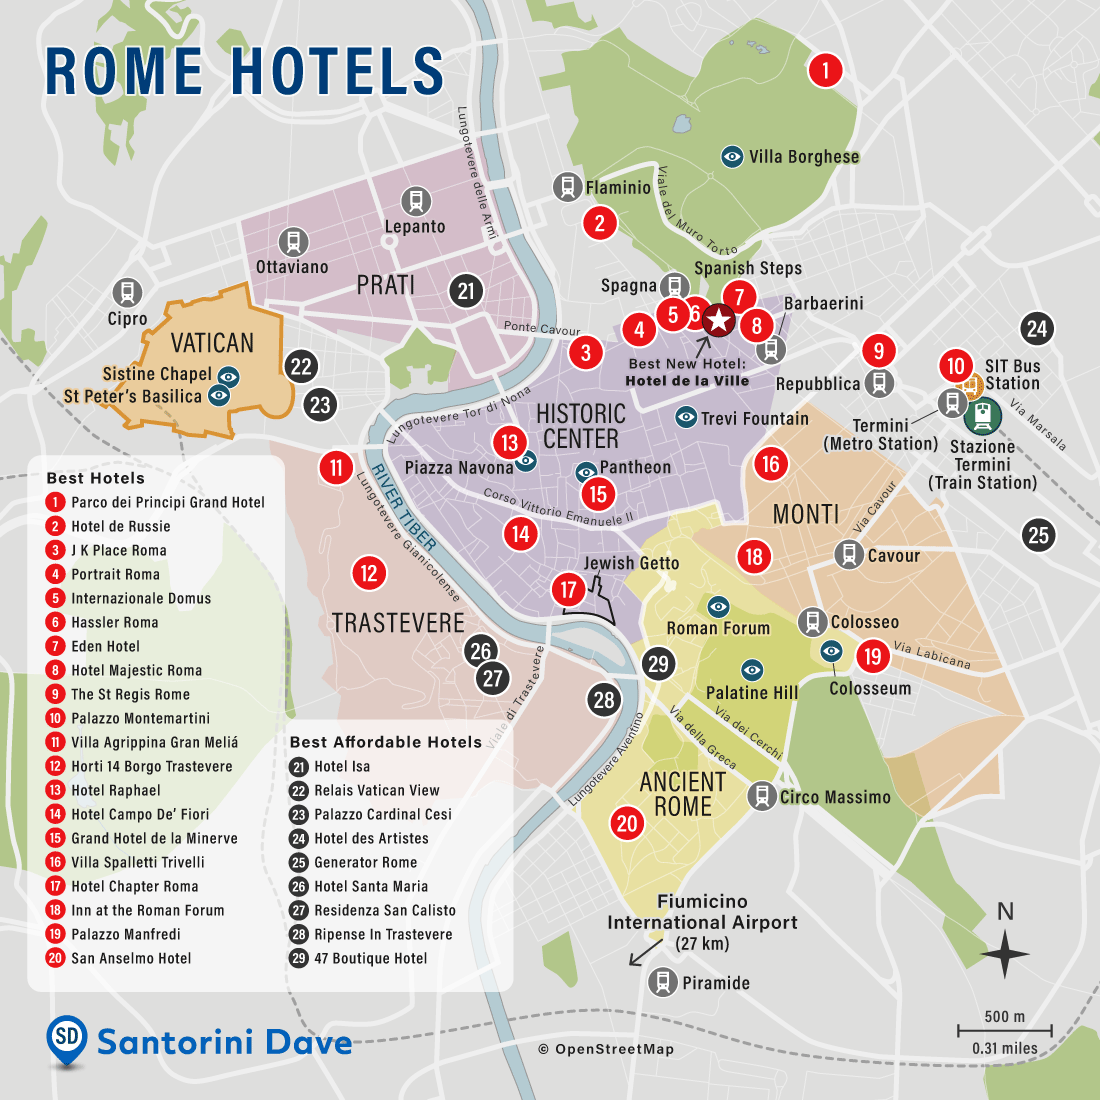 Map of Rome Hotels and Neighborhoods